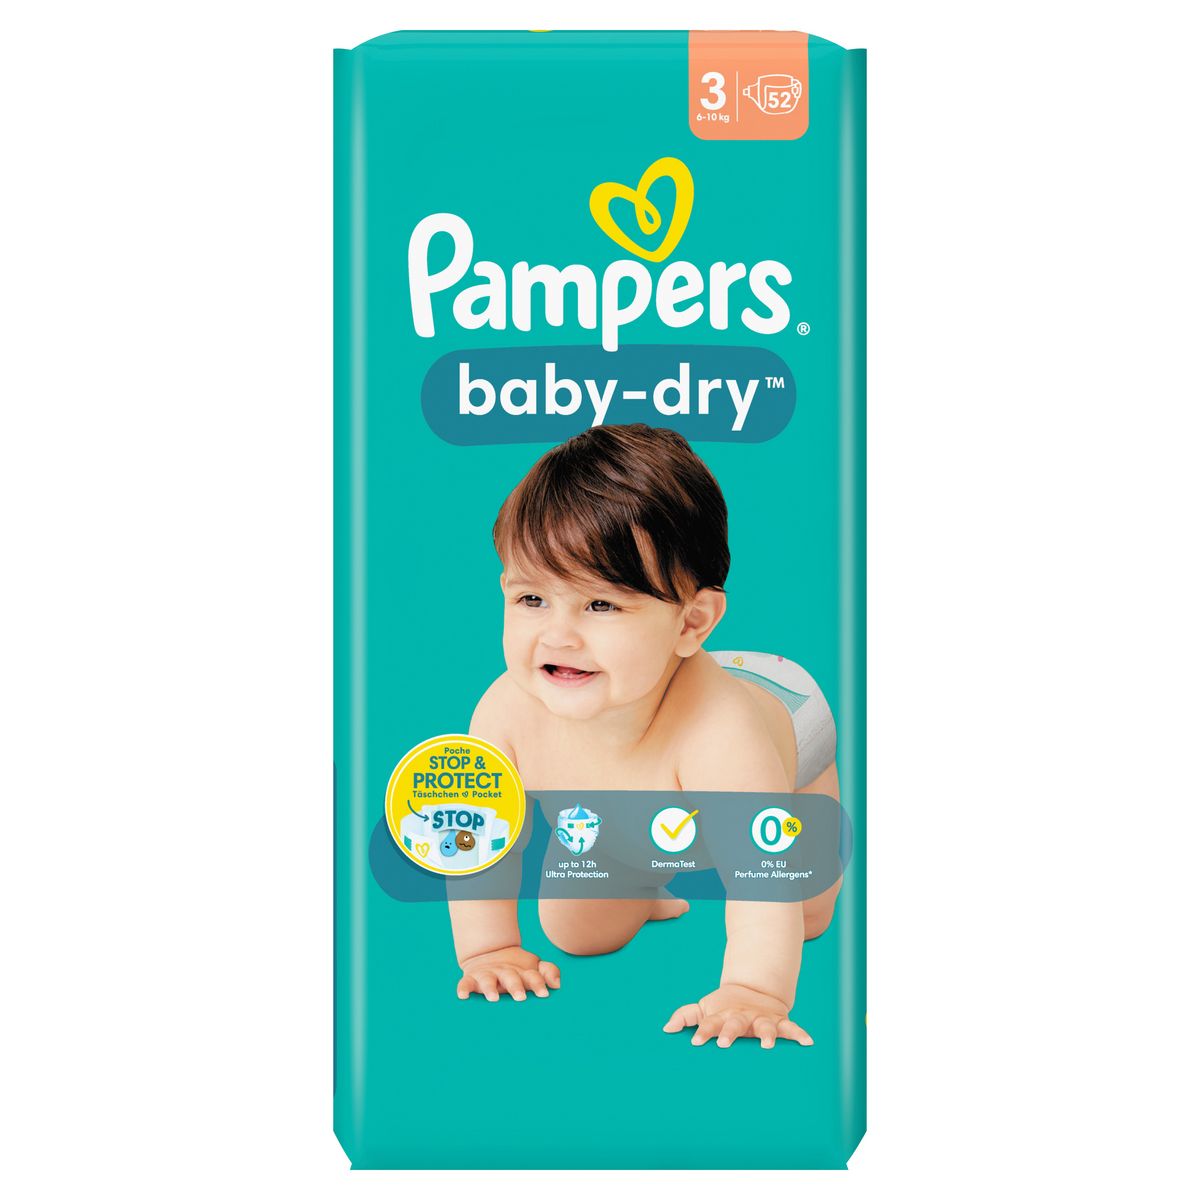 pampers baby 5